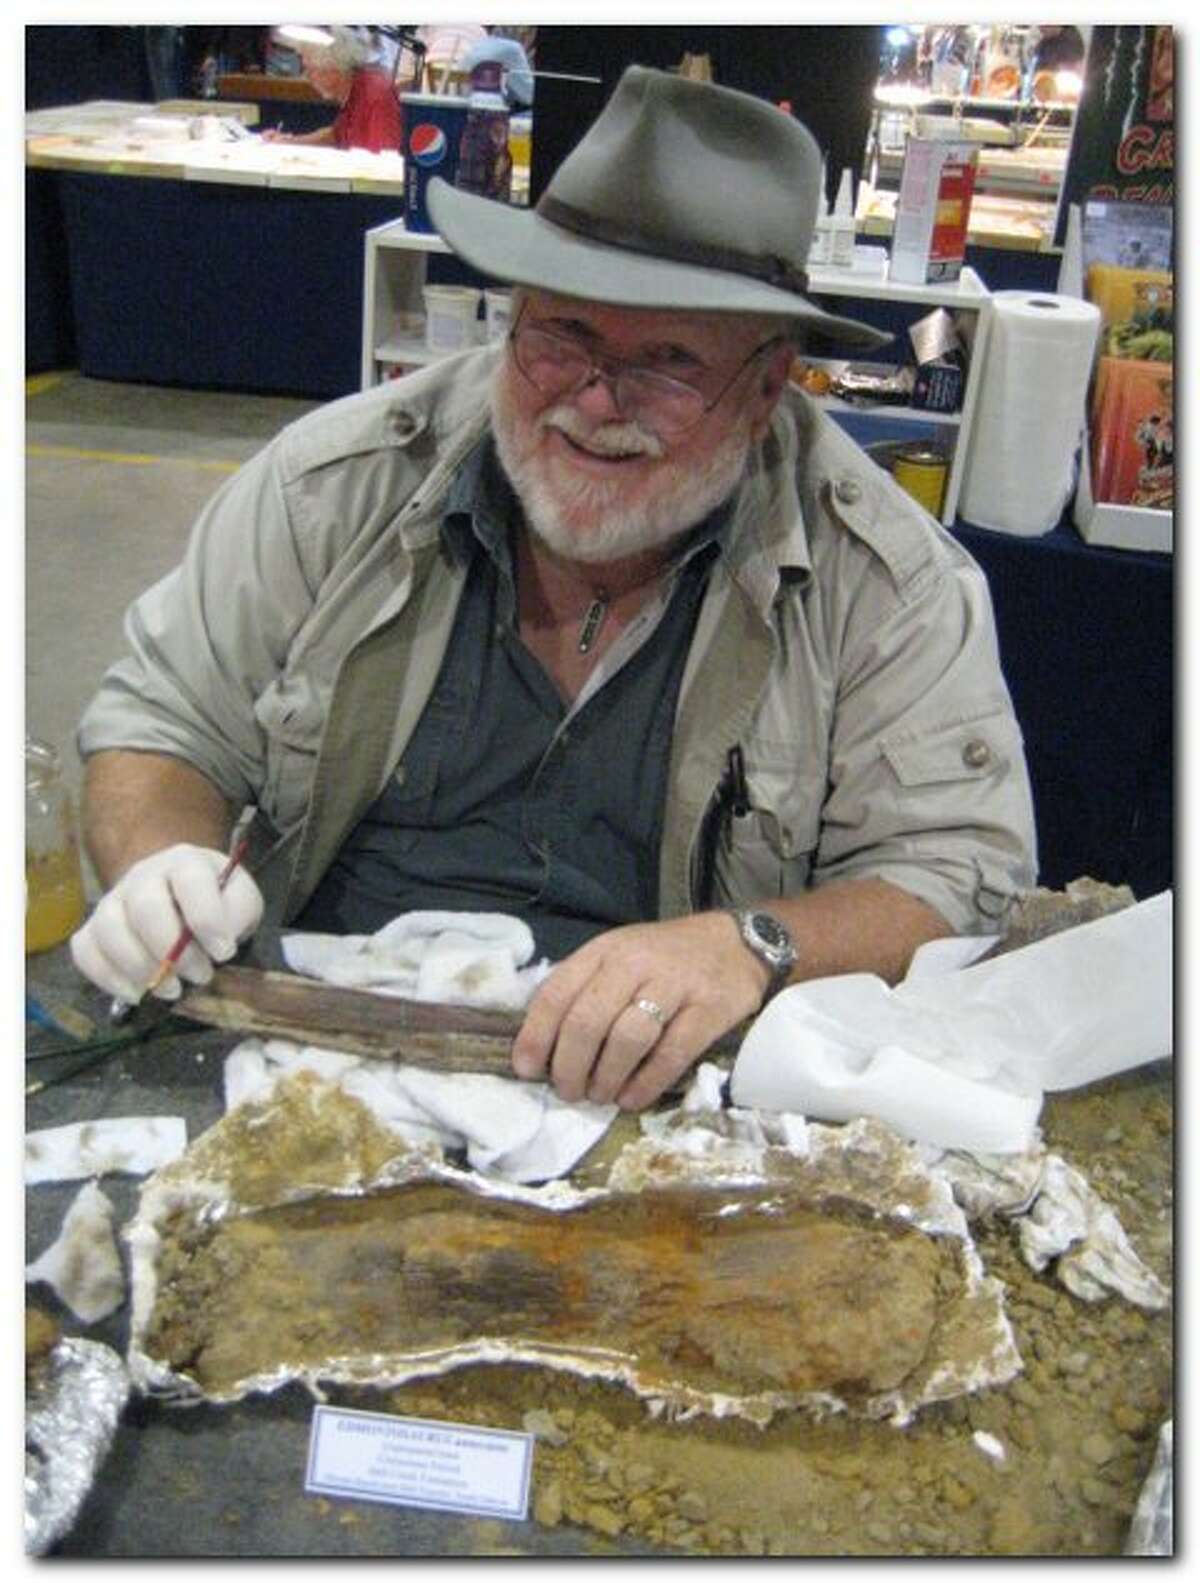 Joseph Kchodl of Midland has been unearthing fossils since he was in elementary school in his home state of New York. He has collected in states including Alabama, Indiana, Ohio, Kentucky and Montana. He has also collected in Ontario and the Czech Republic. He has worked with various crews to recover dinosaur bones as well.